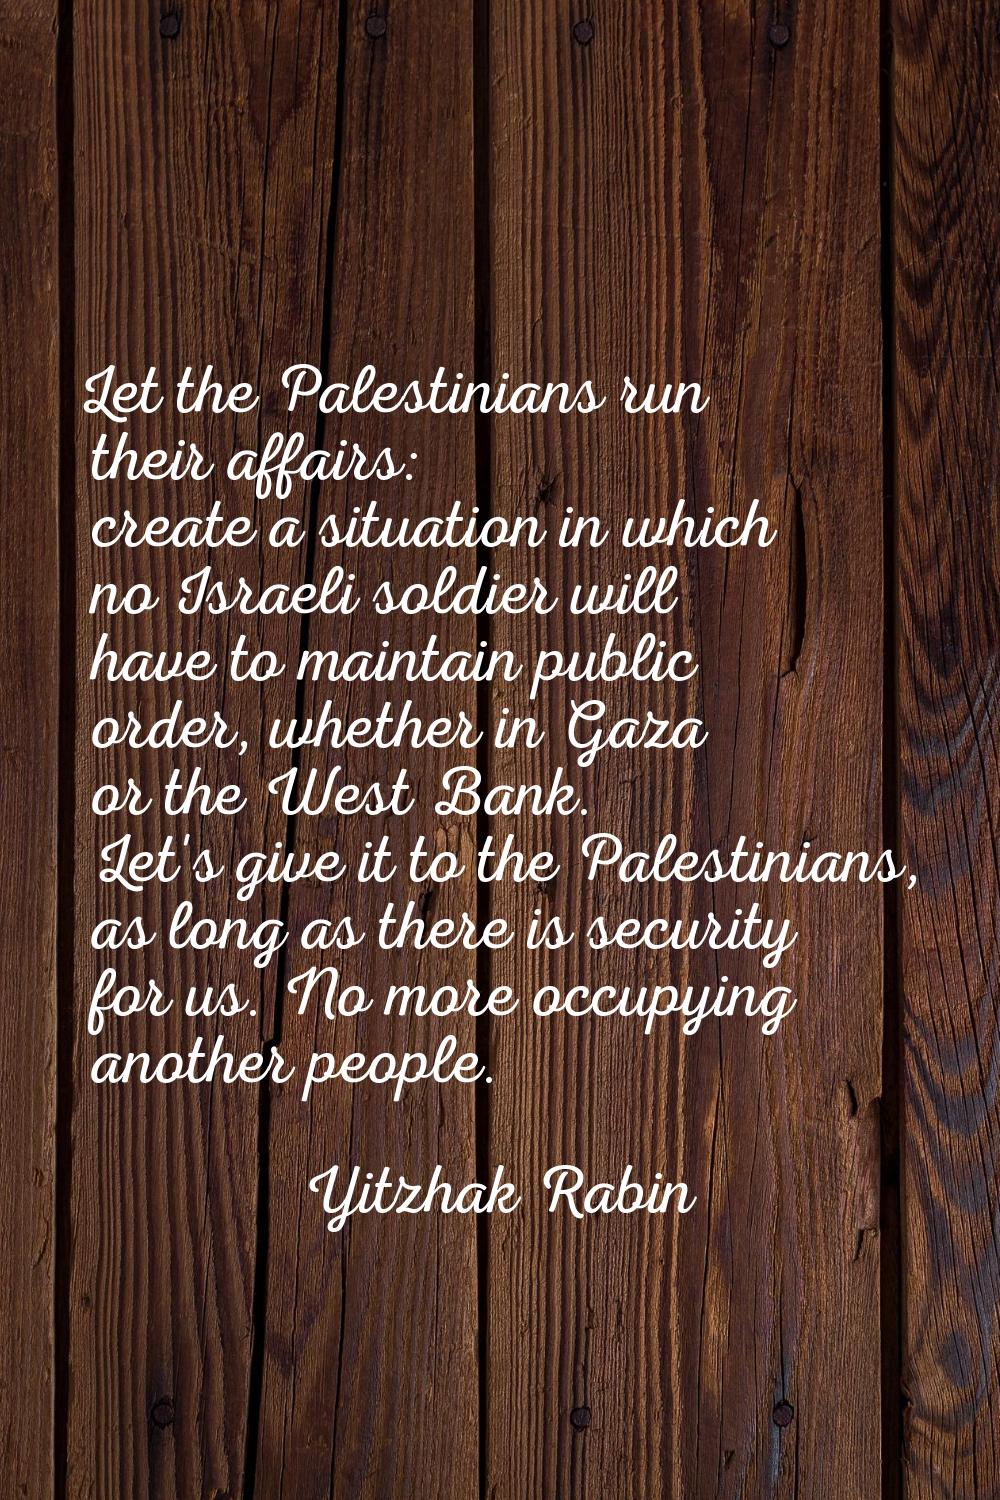 Let the Palestinians run their affairs: create a situation in which no Israeli soldier will have to